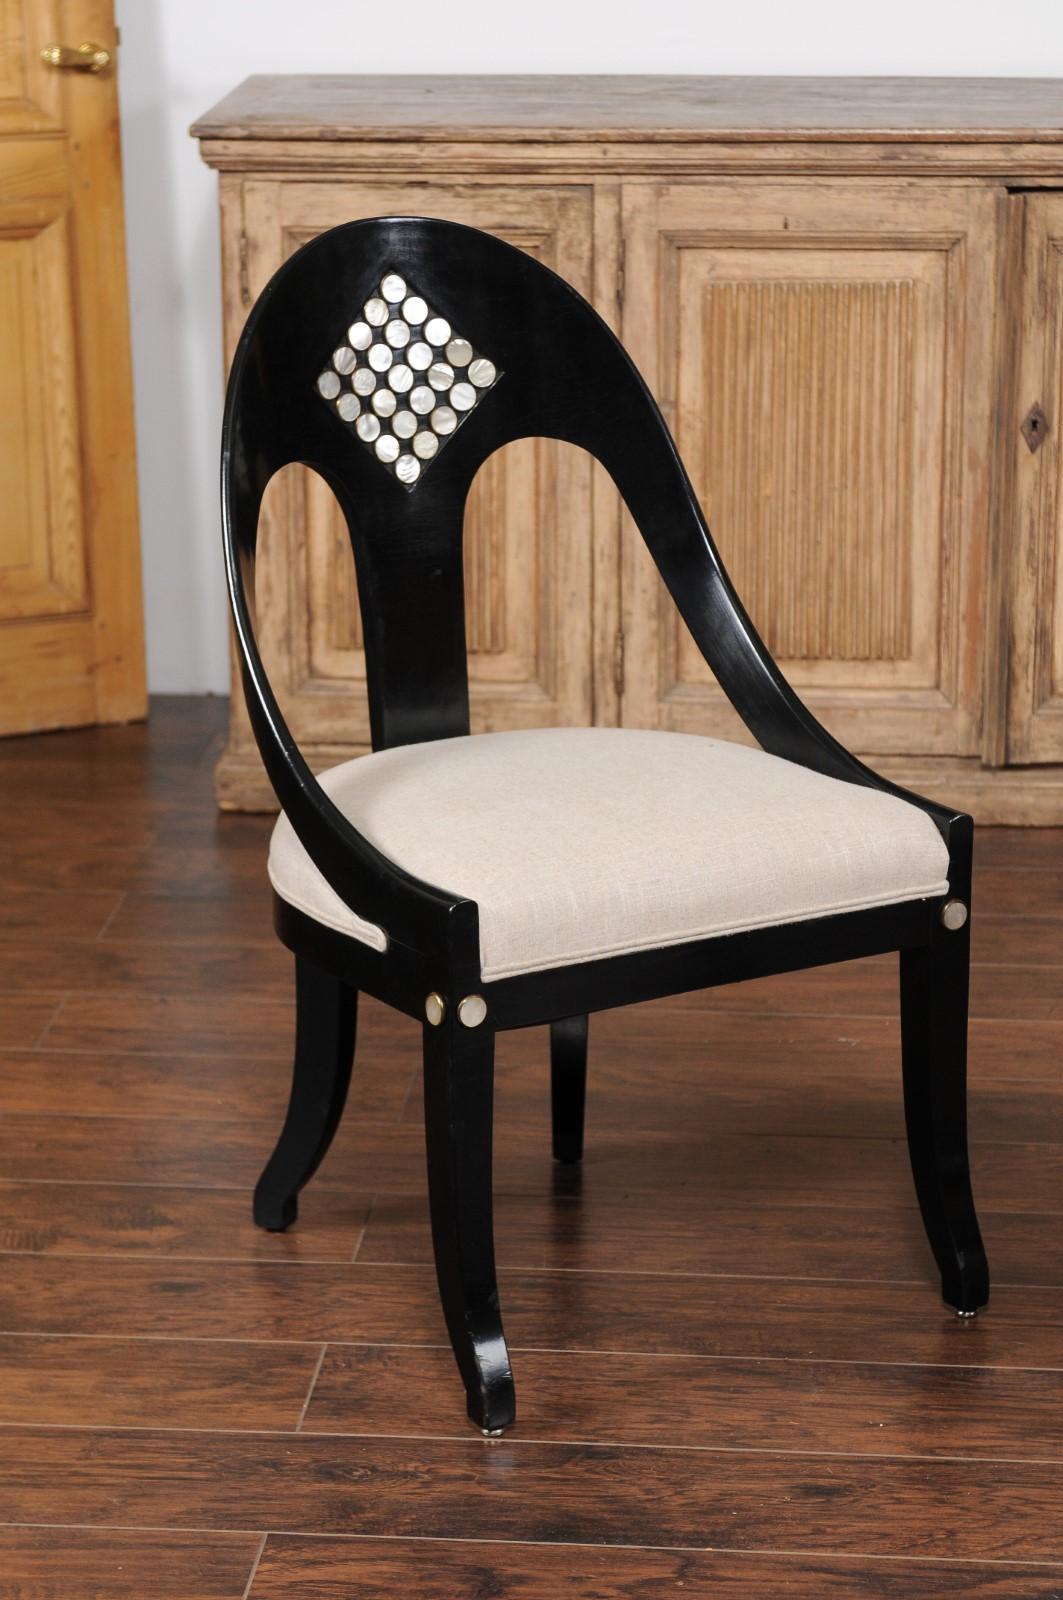 American Pair of Vintage 1950s Ebonized Wood Spoon Back Chairs with Mother-of-pearl Inlay